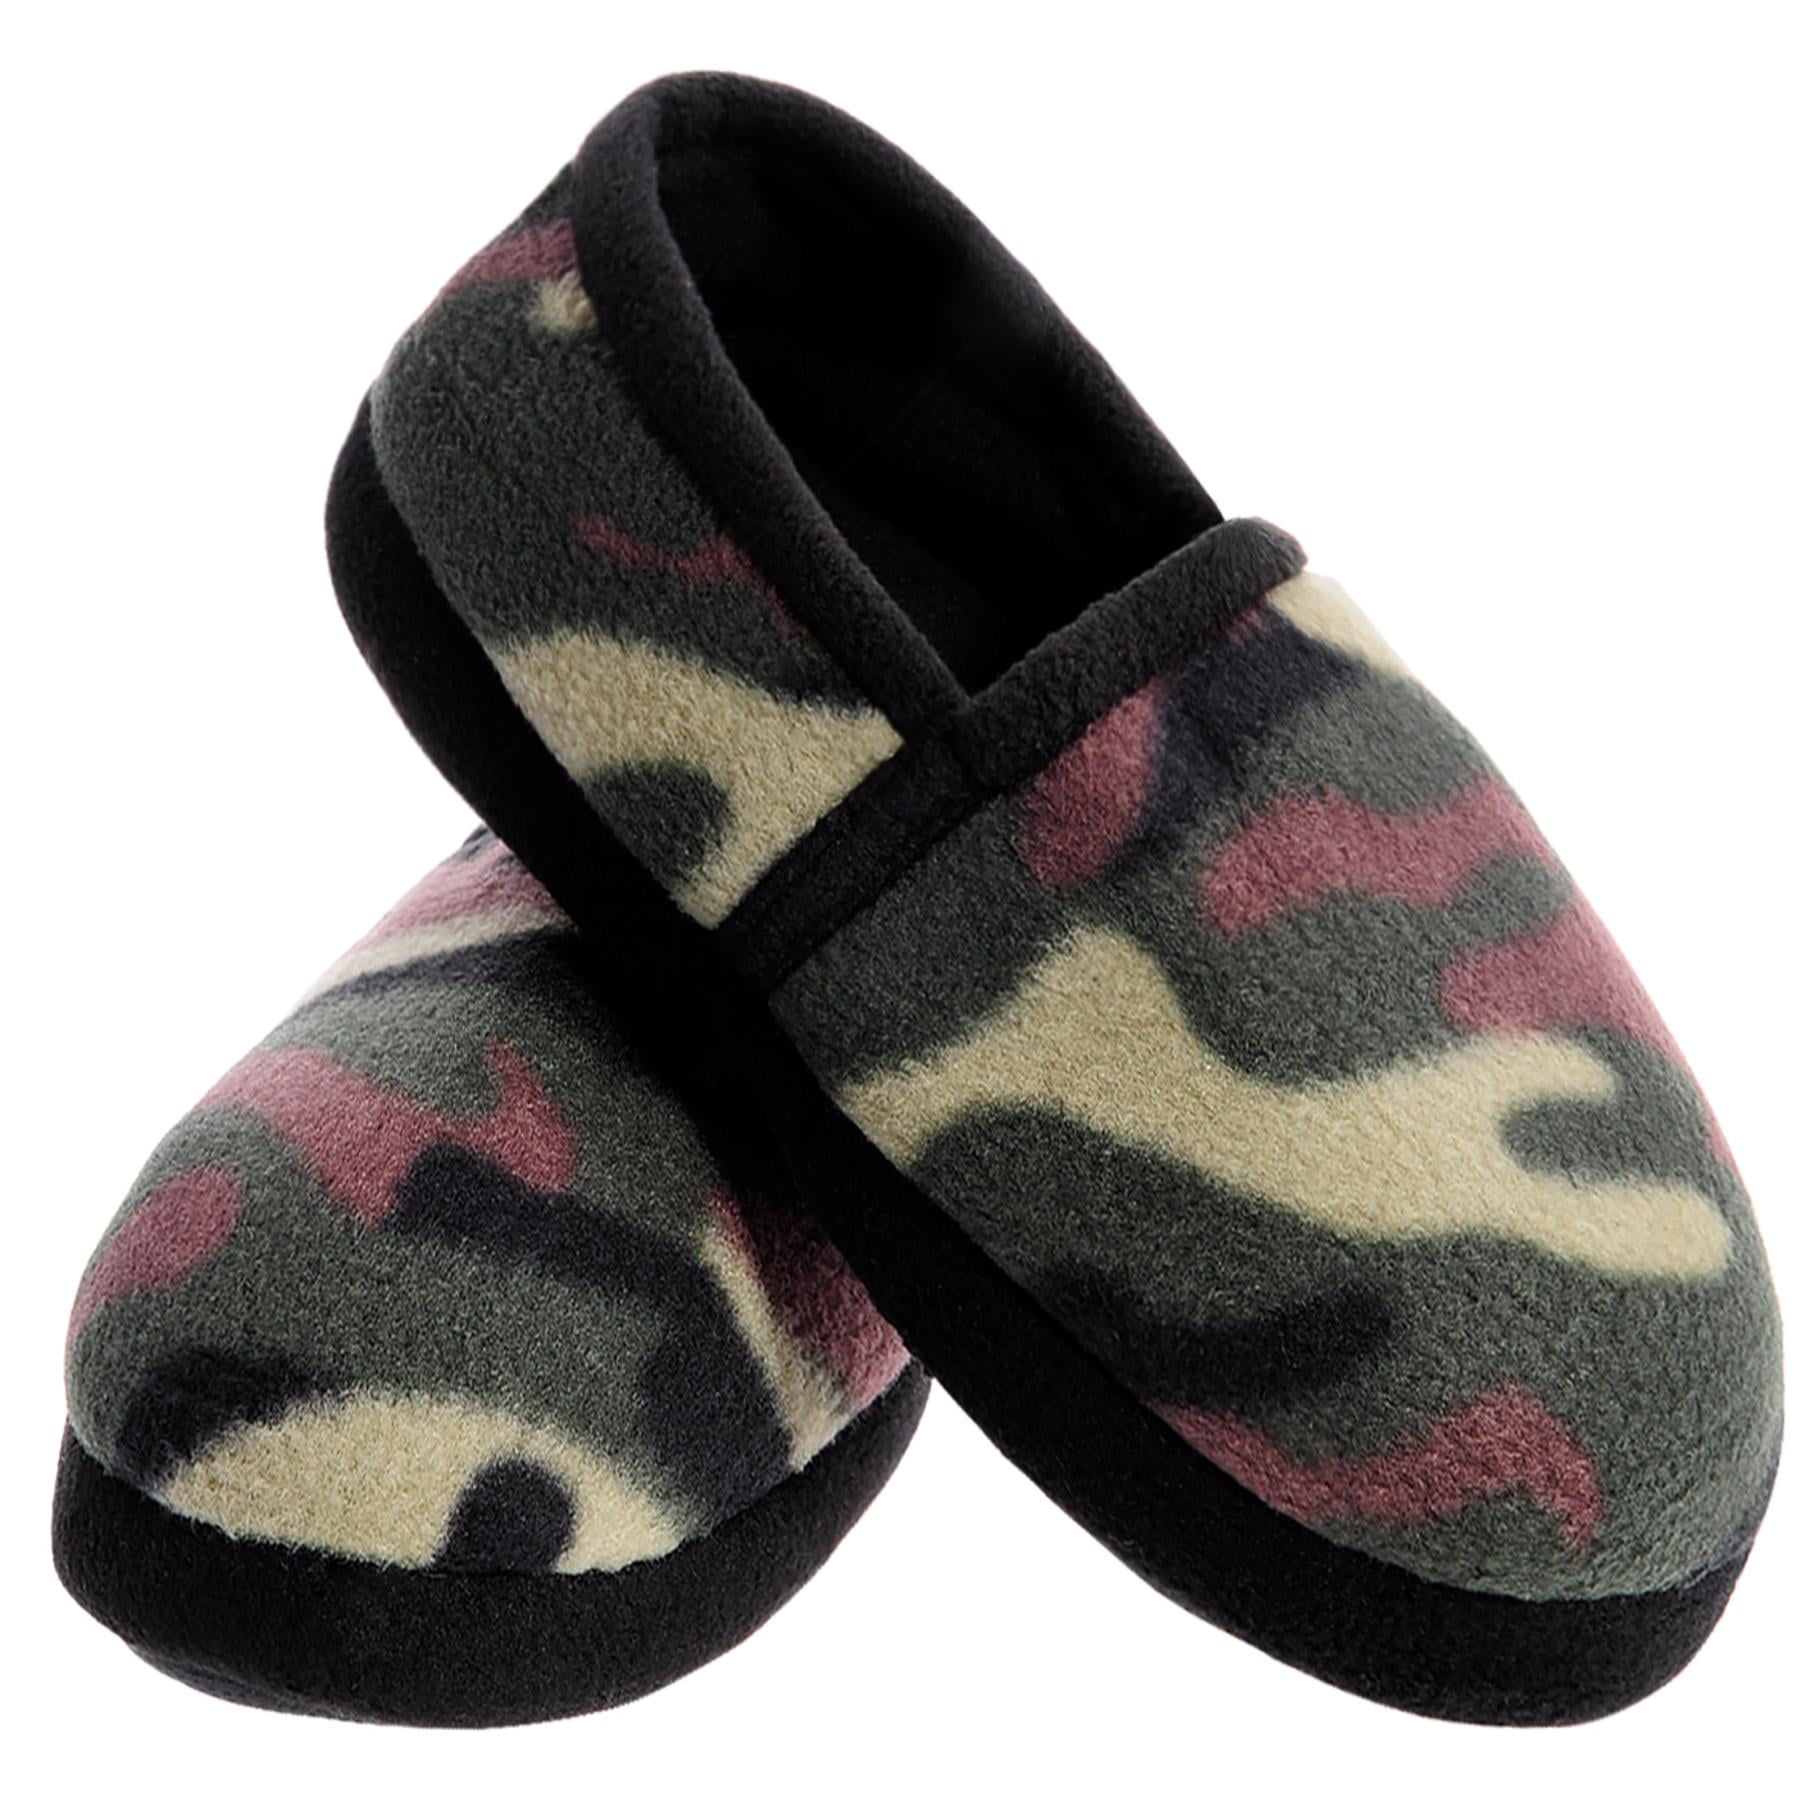 Home Slipper Unisex Boys Girls Indoor House Non-Slip Camouflage Camo Print Slippers Shoes 